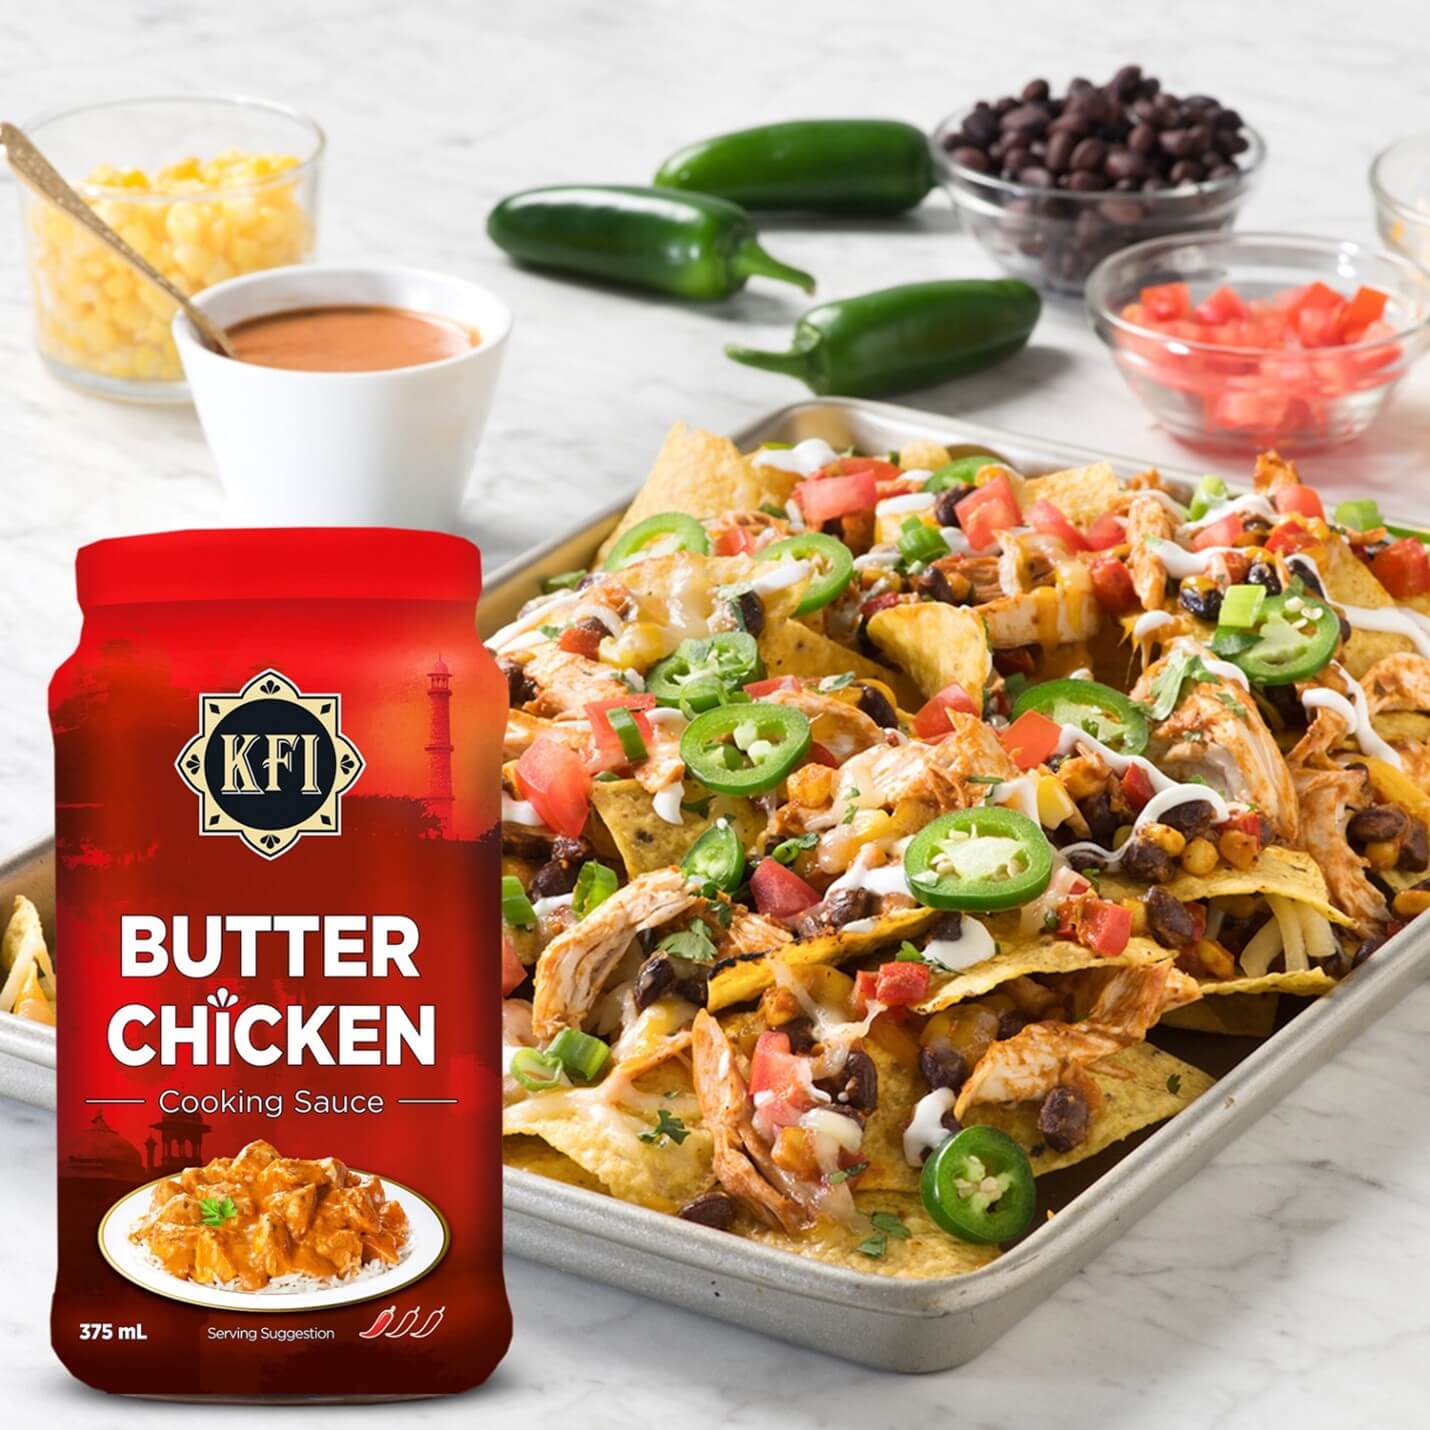 KFI Butter Chicken Nachos Recipe By KFI Sauces Is Perfect For Your Holiday Spread